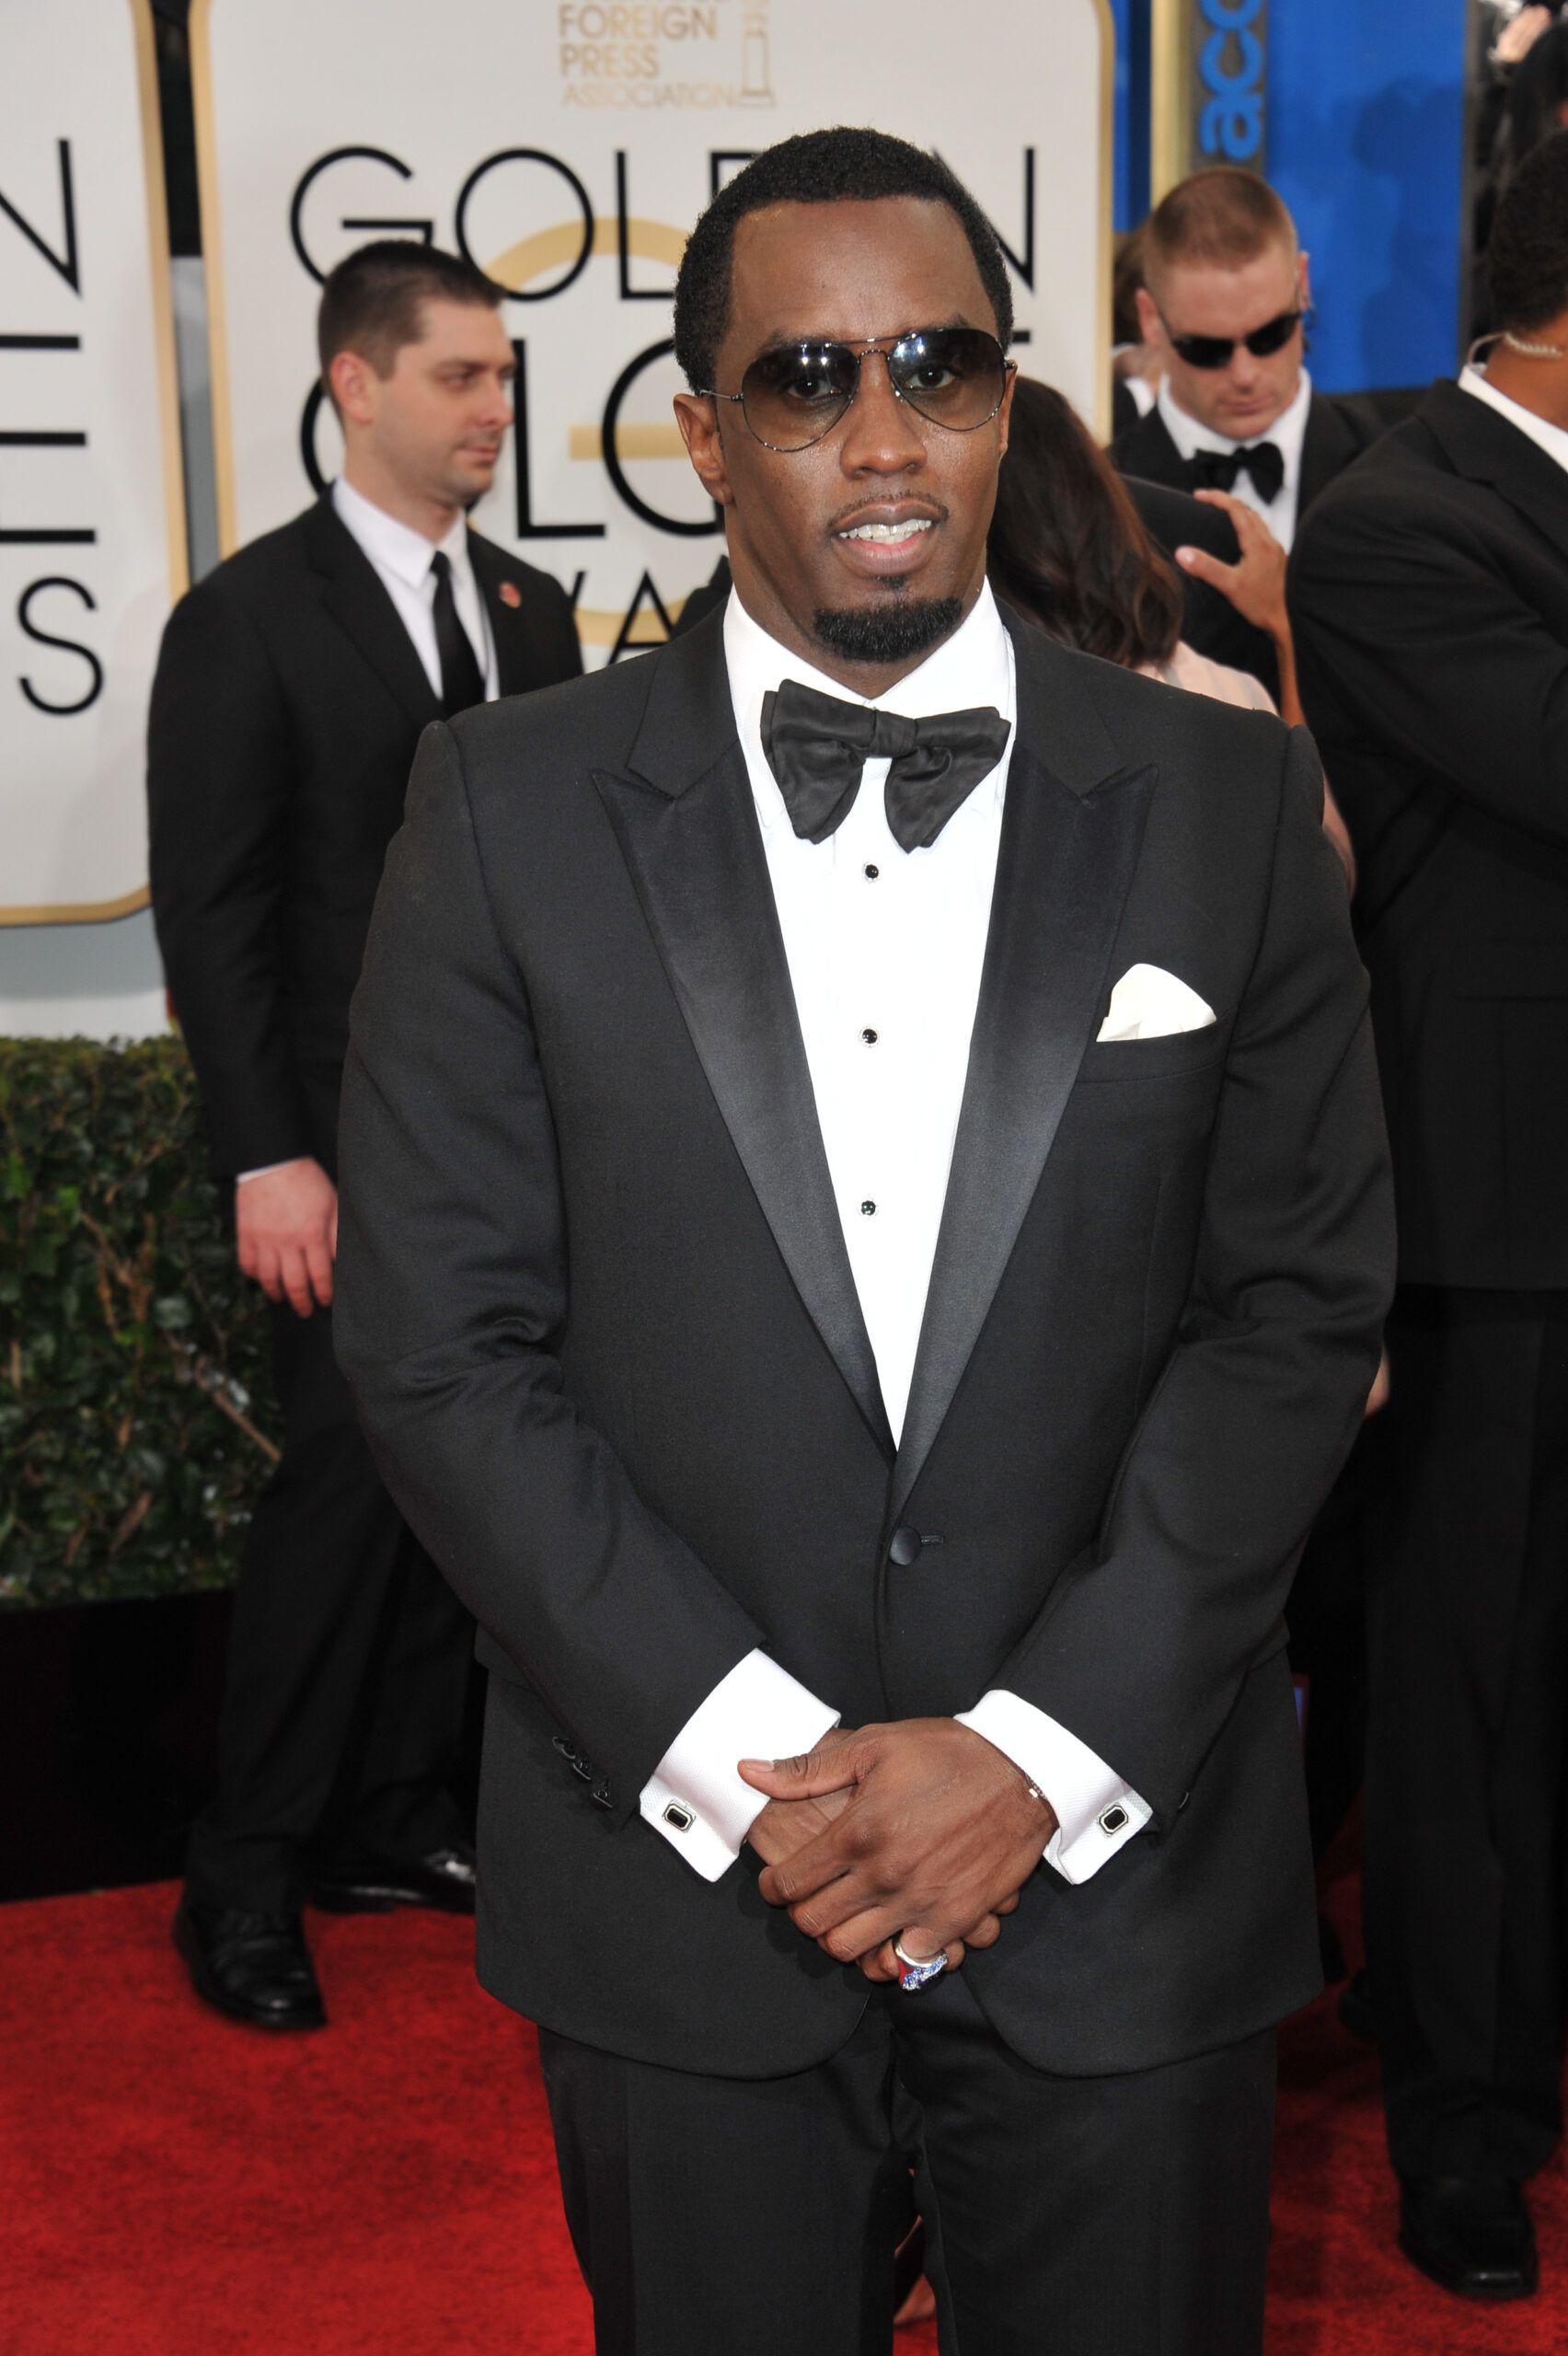 Sean "Diddy" Combs has been accused of sexual assault by a second woman. Credit: Shutterstock.com